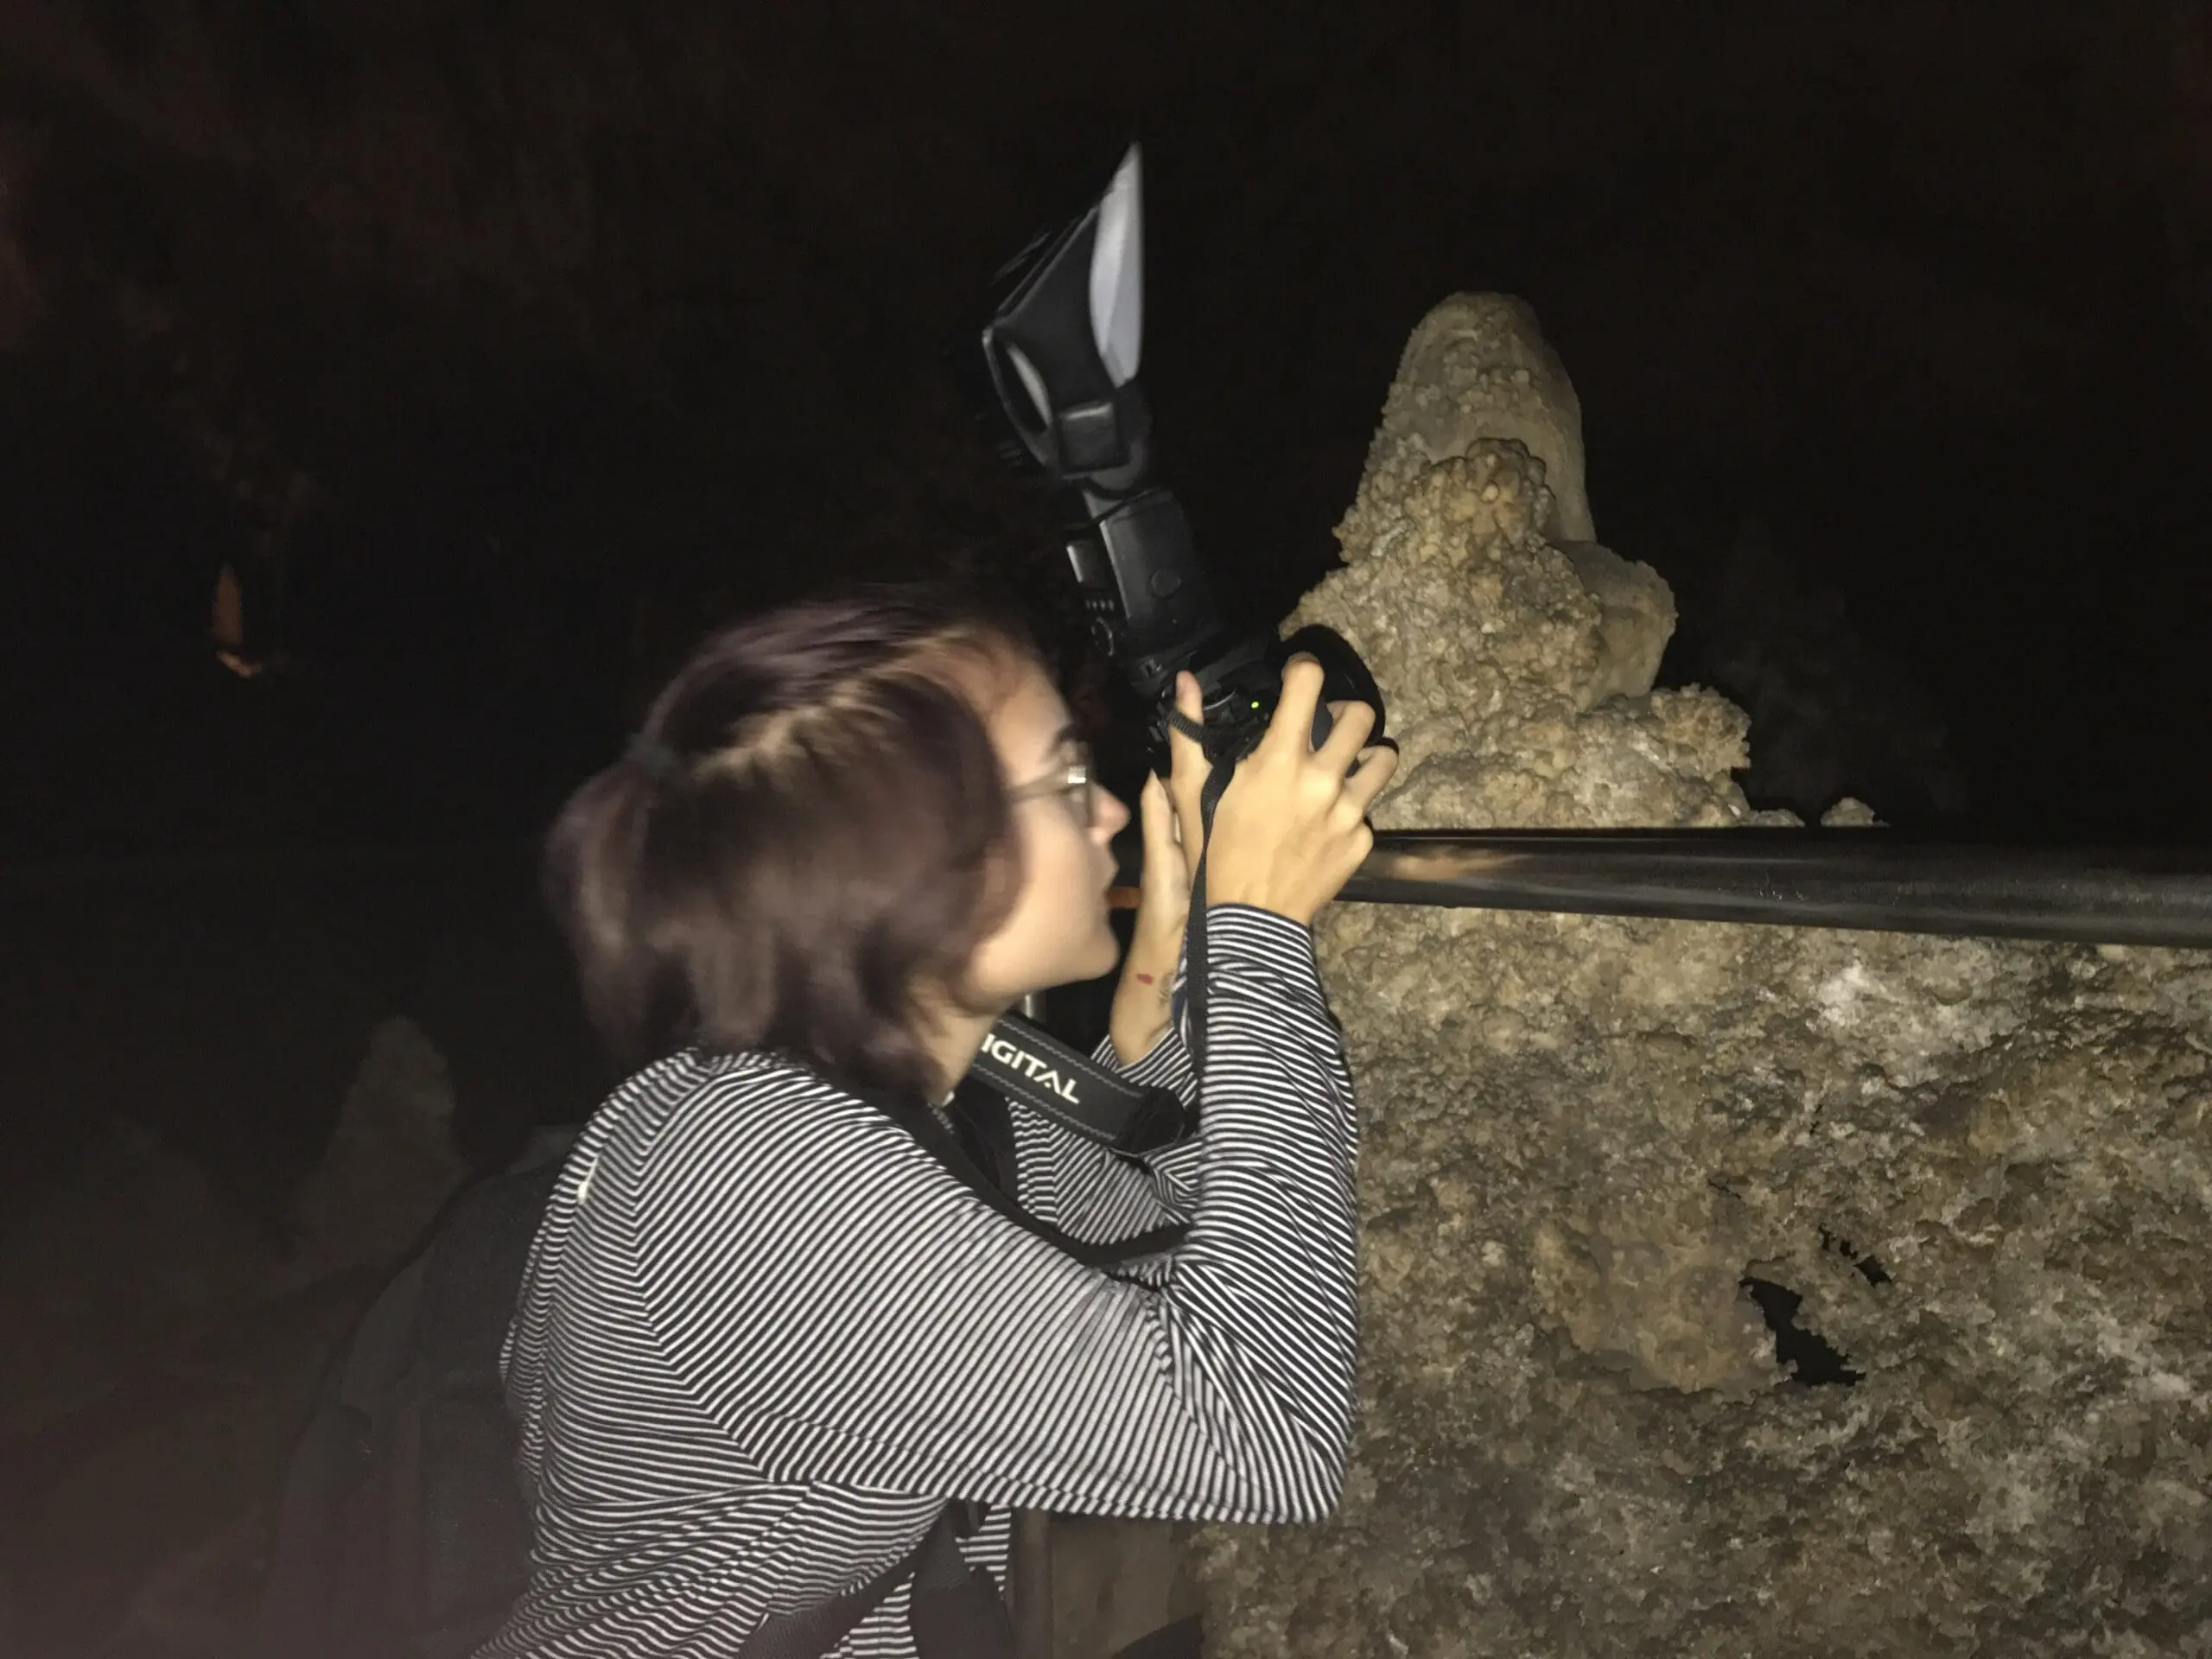 My teen trying her chance at carlsbad caverns cave photography